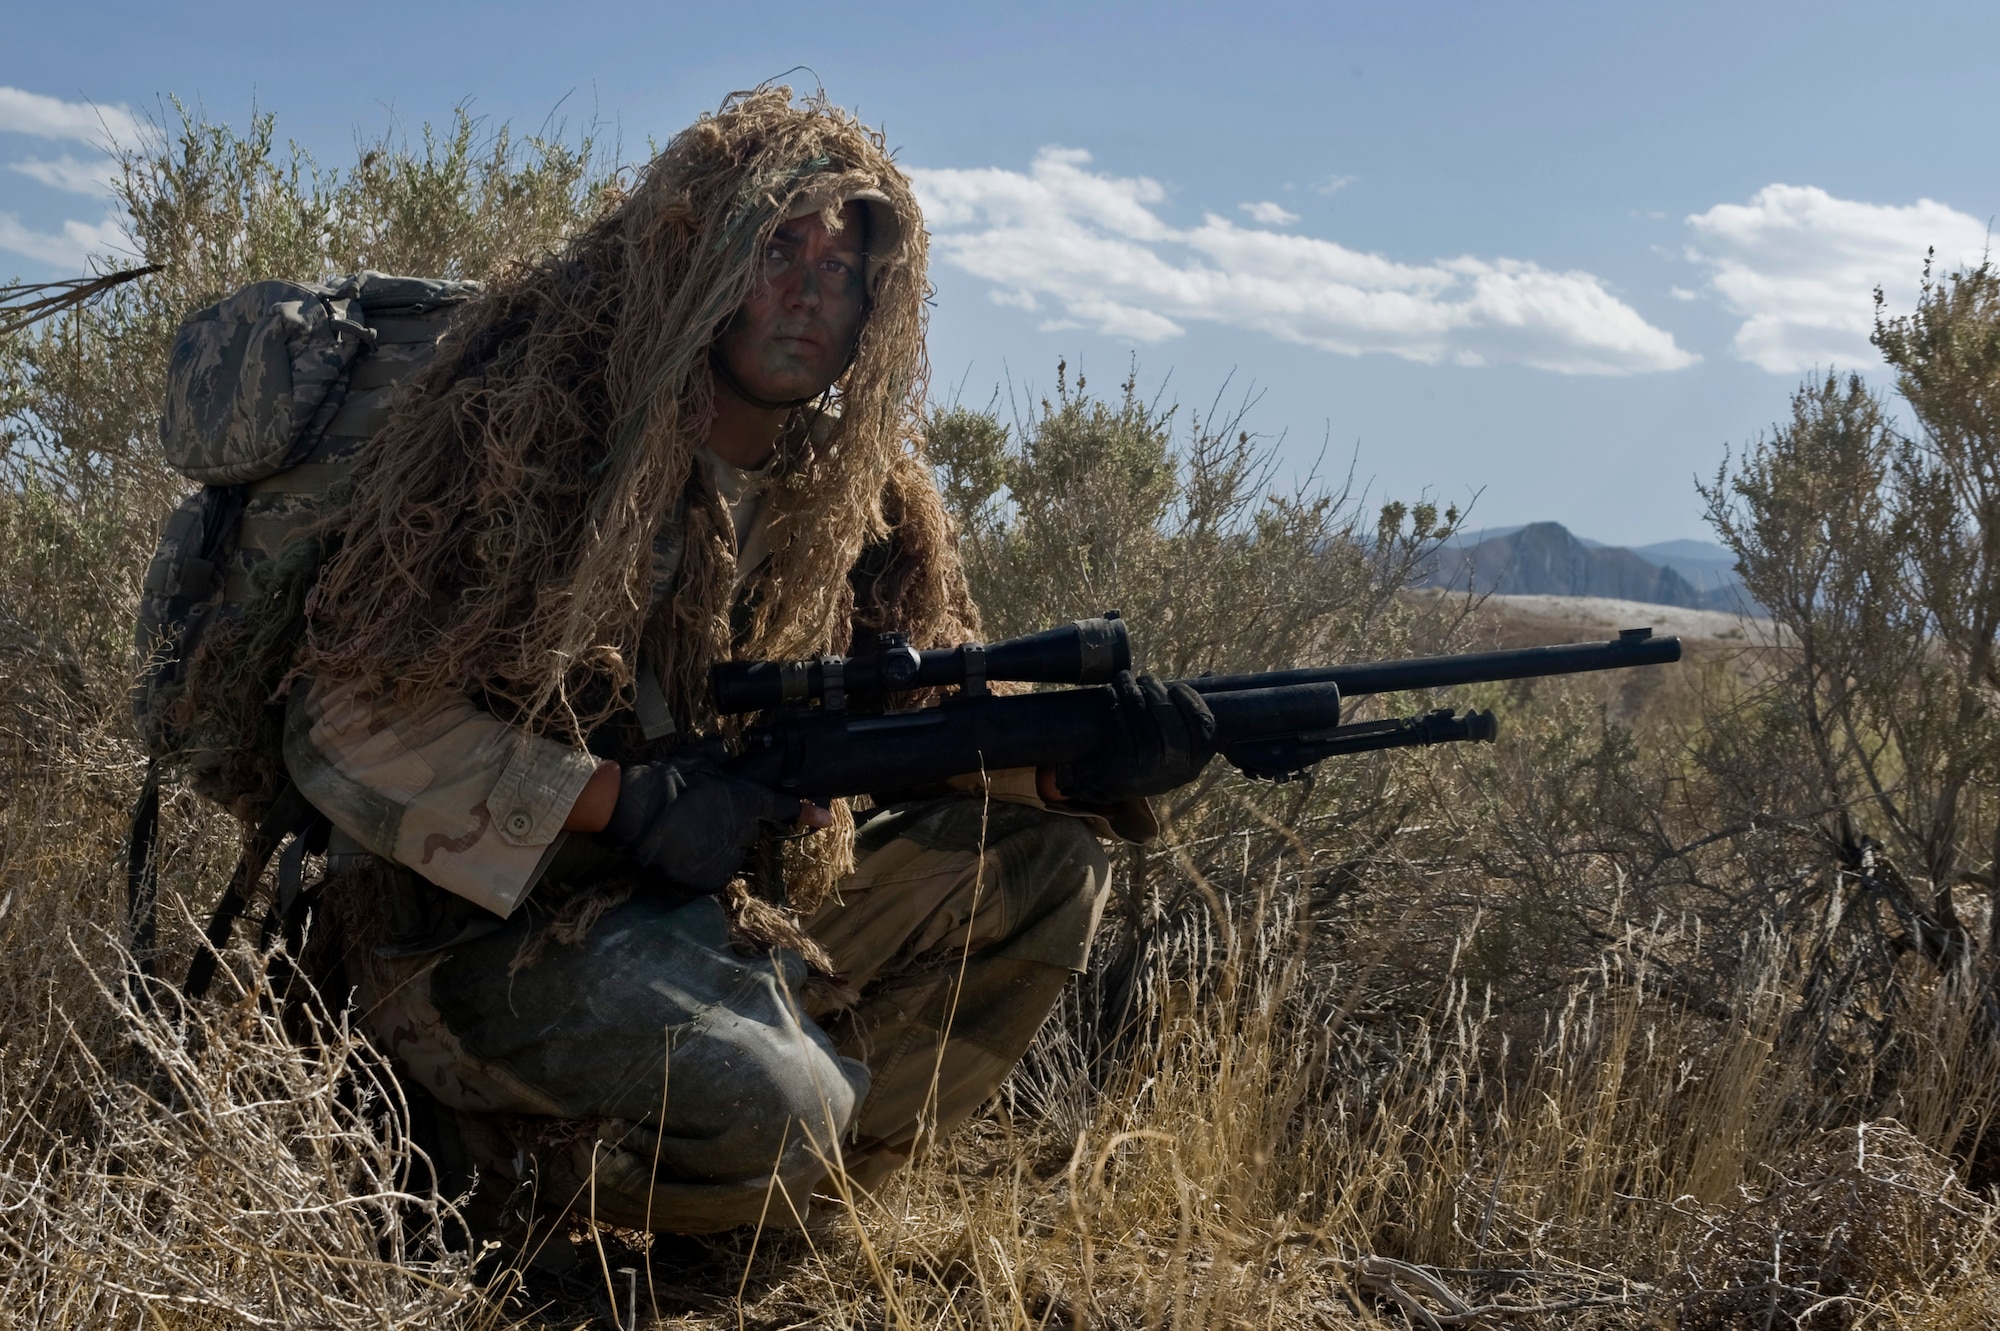 U.S. Air Force Staff Sgt. Alyssa Gomez, 99th Ground Combat Training Squadron instructor, poses with her M24 Sniper Weapon System May 11, 2012, at the Nevada Test and Training Range. Gomez is the ninth female in Air Force history to become a sniper. (U.S. Air Force photo by Airman 1st Class Daniel Hughes)

